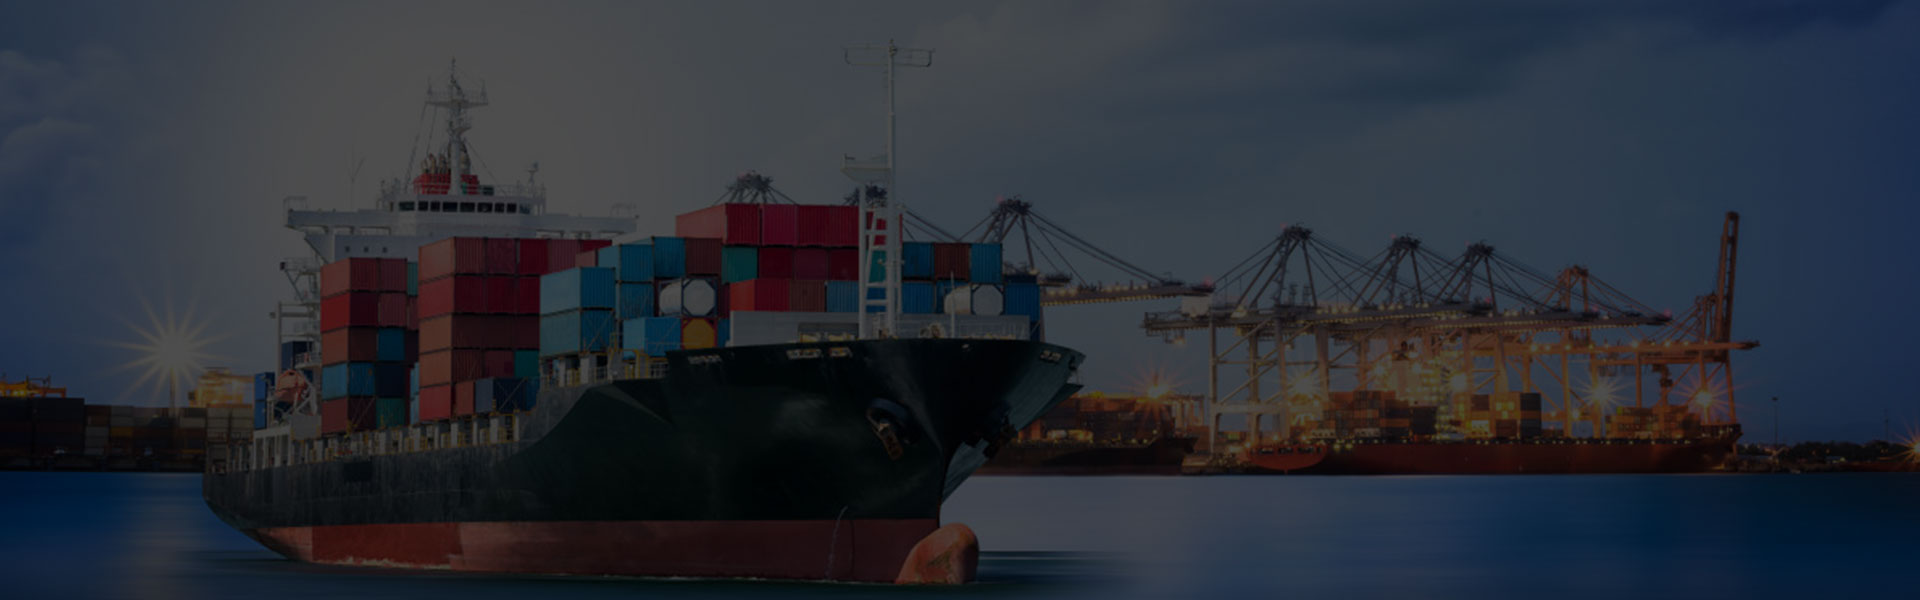 Do you need global freight cargo & logistic services?